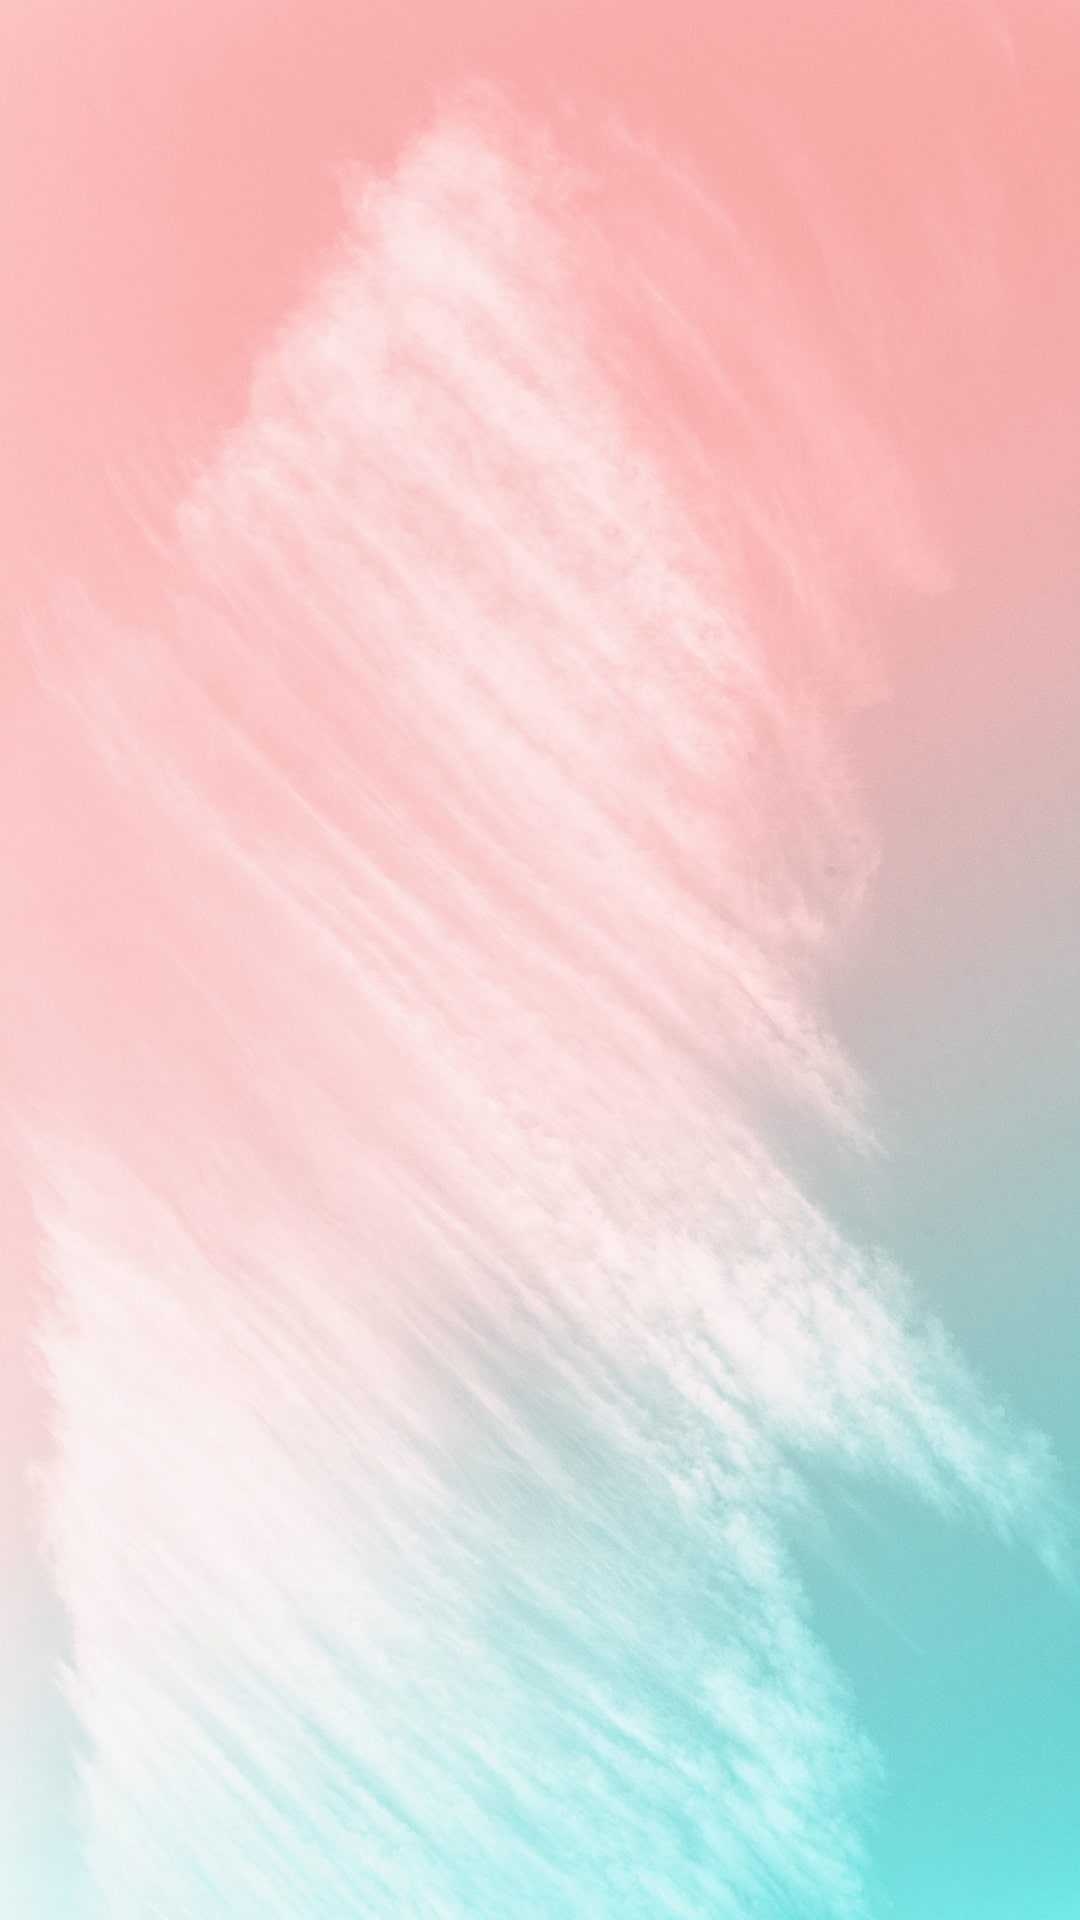 Pastel colors wallpapers, Soft and dreamy, Serene and soothing, Tranquil and relaxing, 1080x1920 Full HD Handy